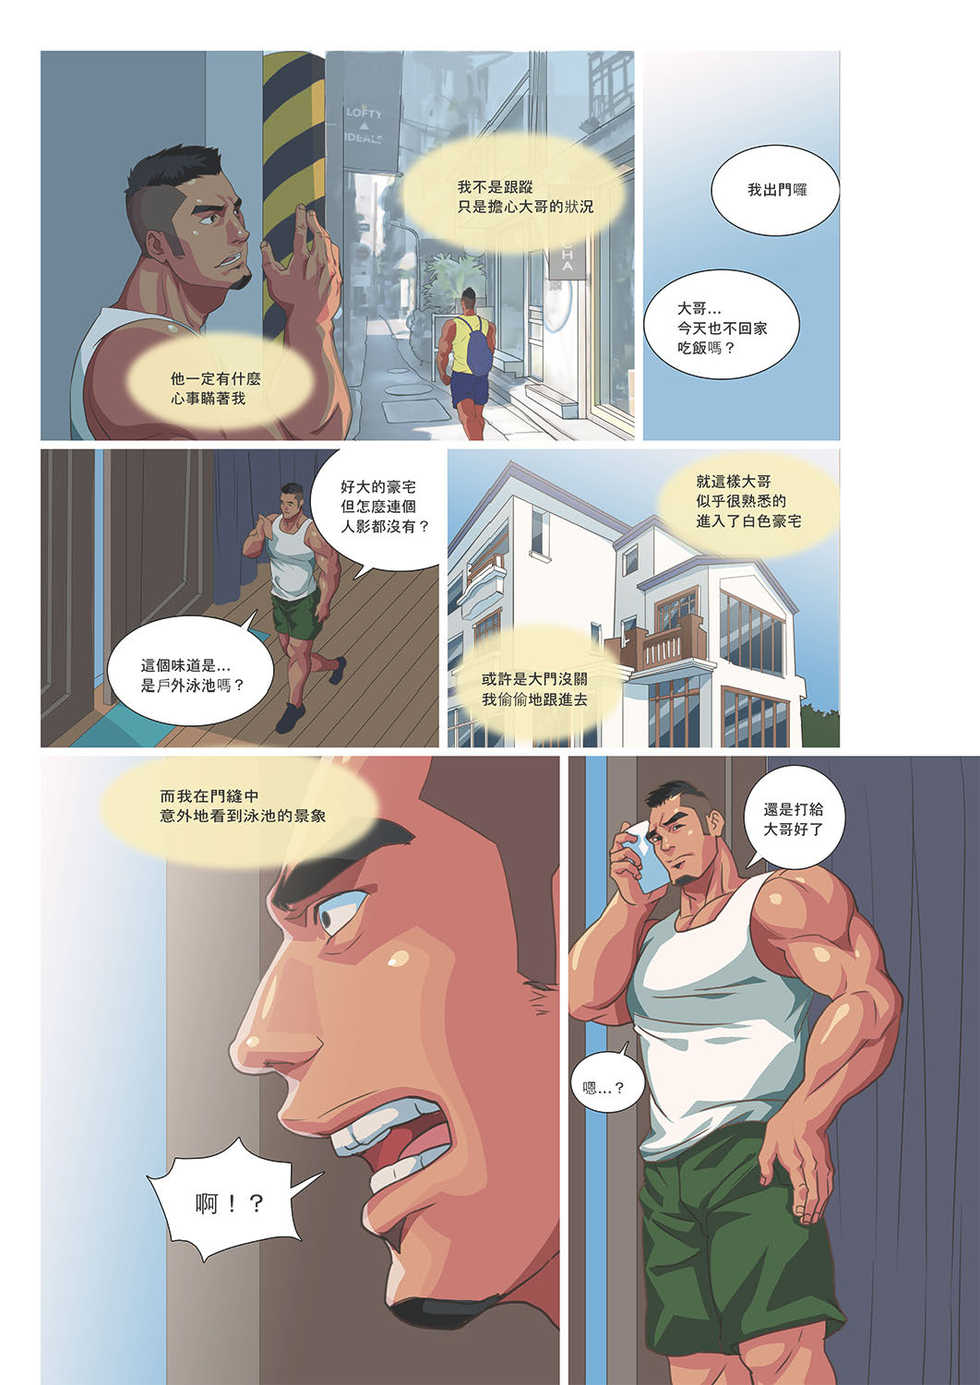 [Sexy Xiong] Summer Men vol.3 Muscle milk bath [Chinese] [Digital] - Page 11